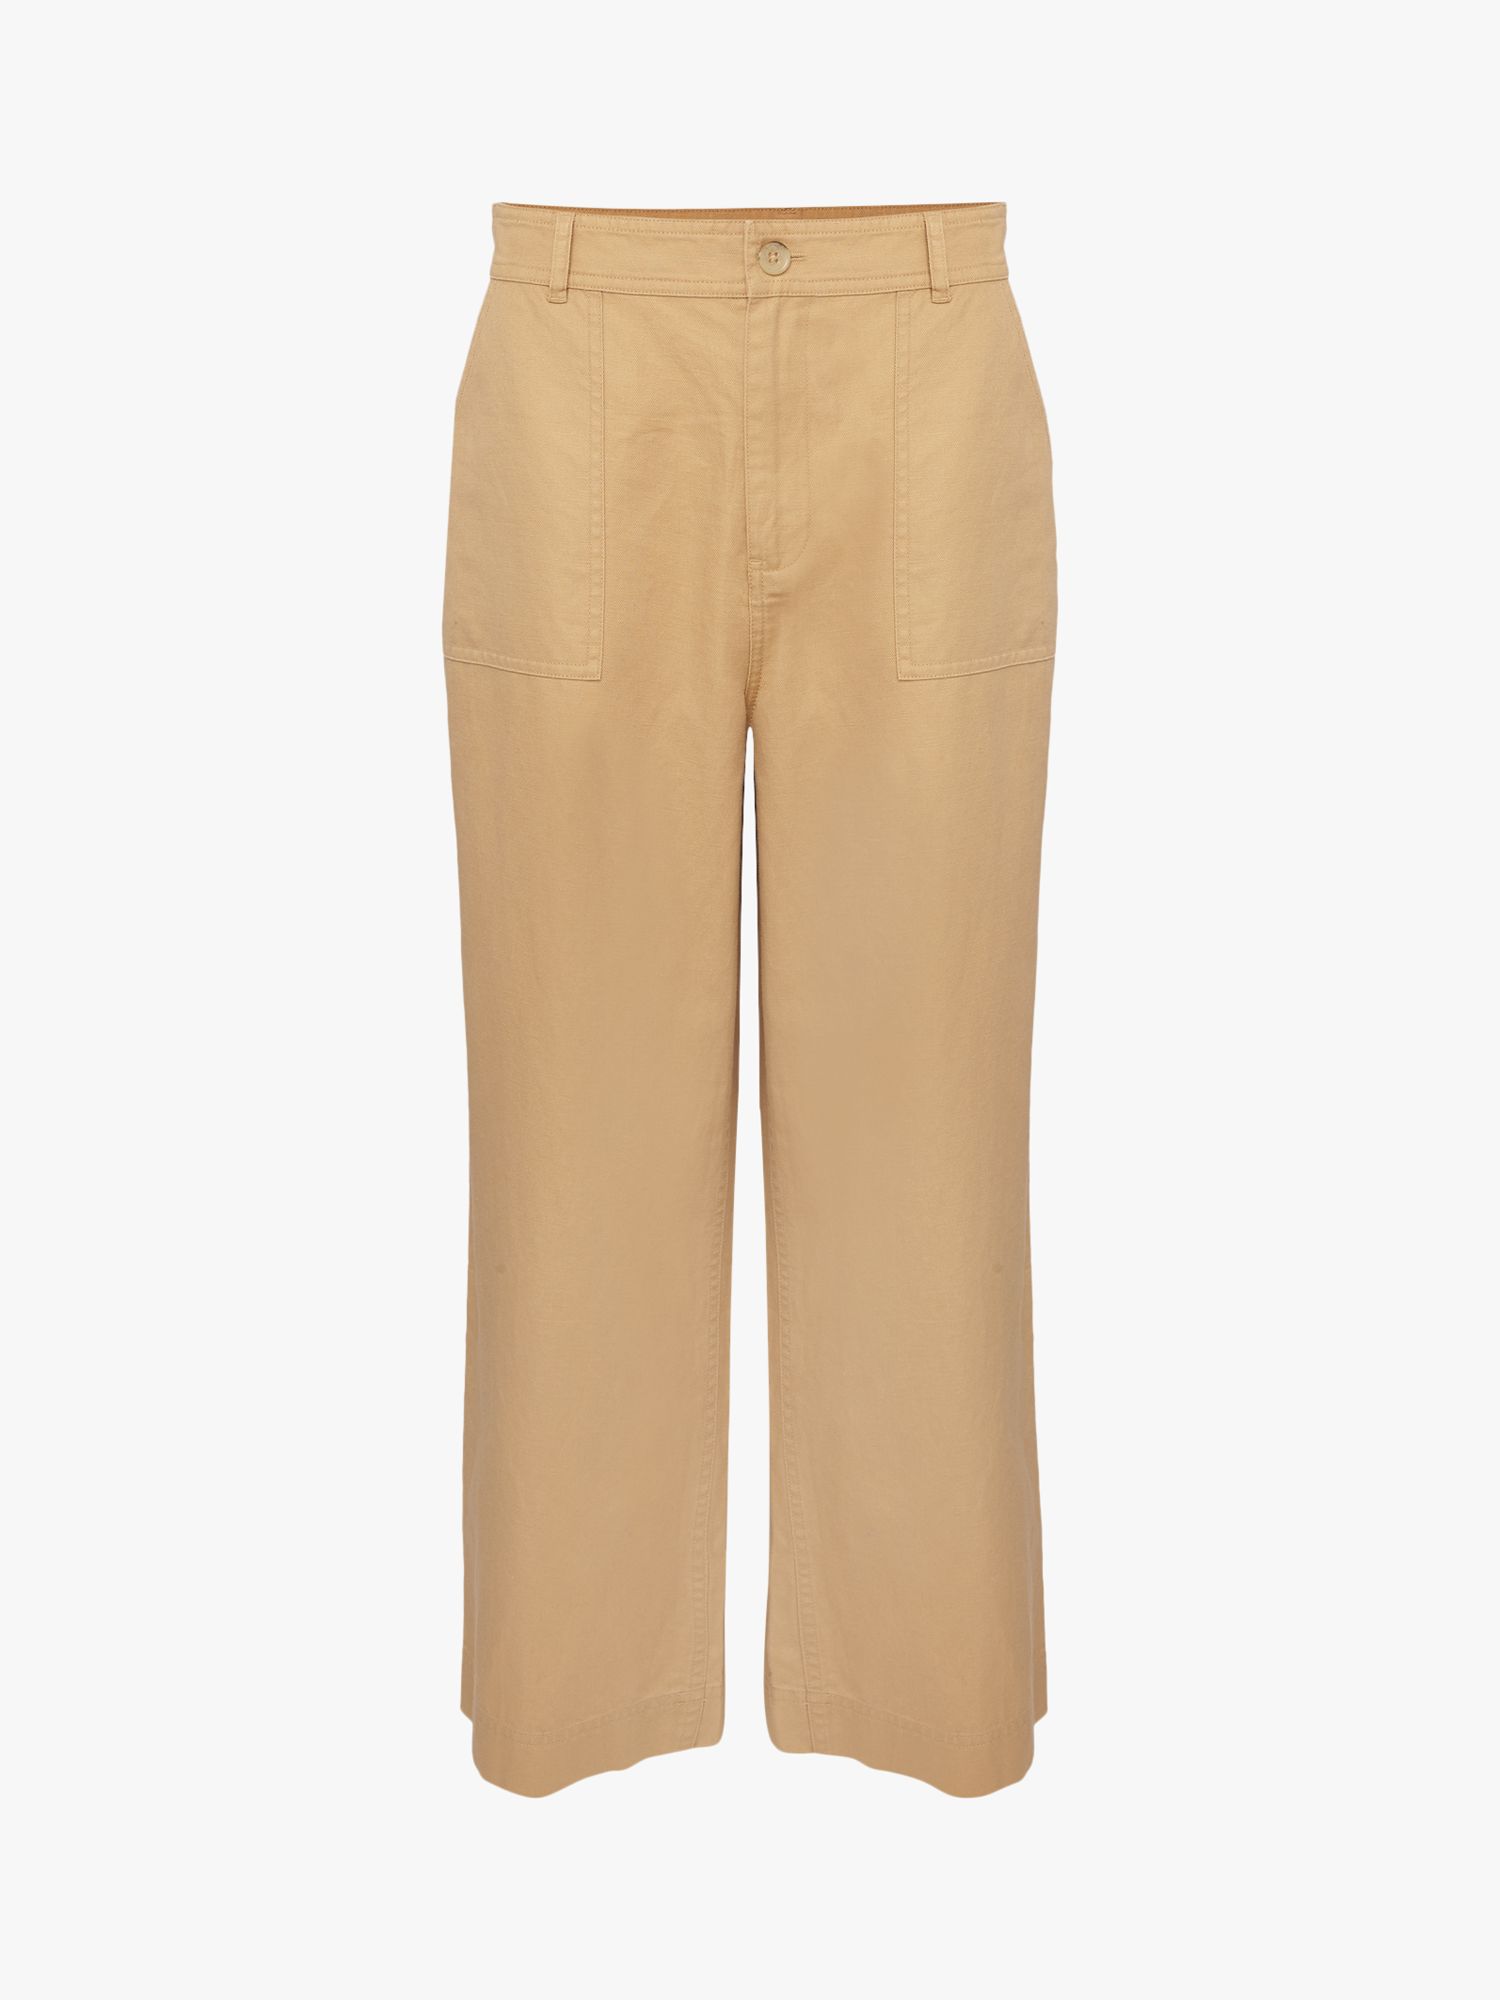 Hobbs Cropped Wide Leg Trousers, Neutral at John Lewis & Partners